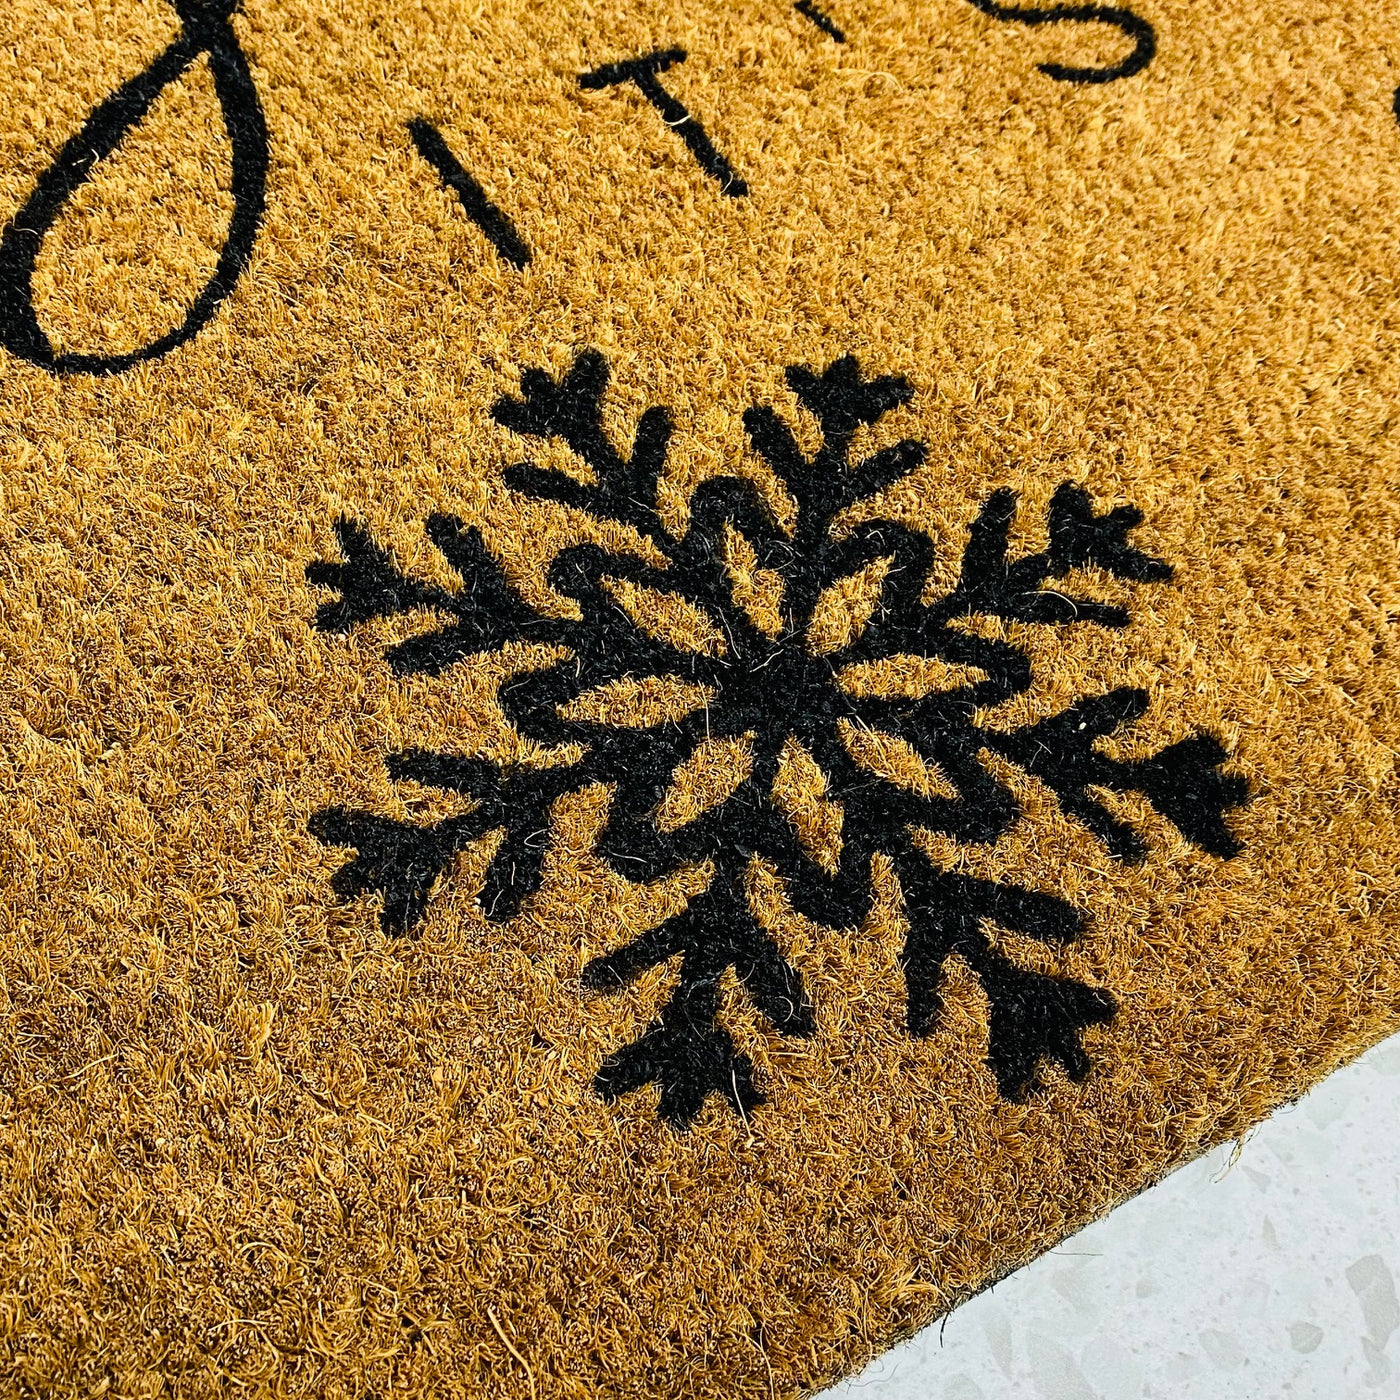 Baby It's Cold Outside - Christmas Doormat